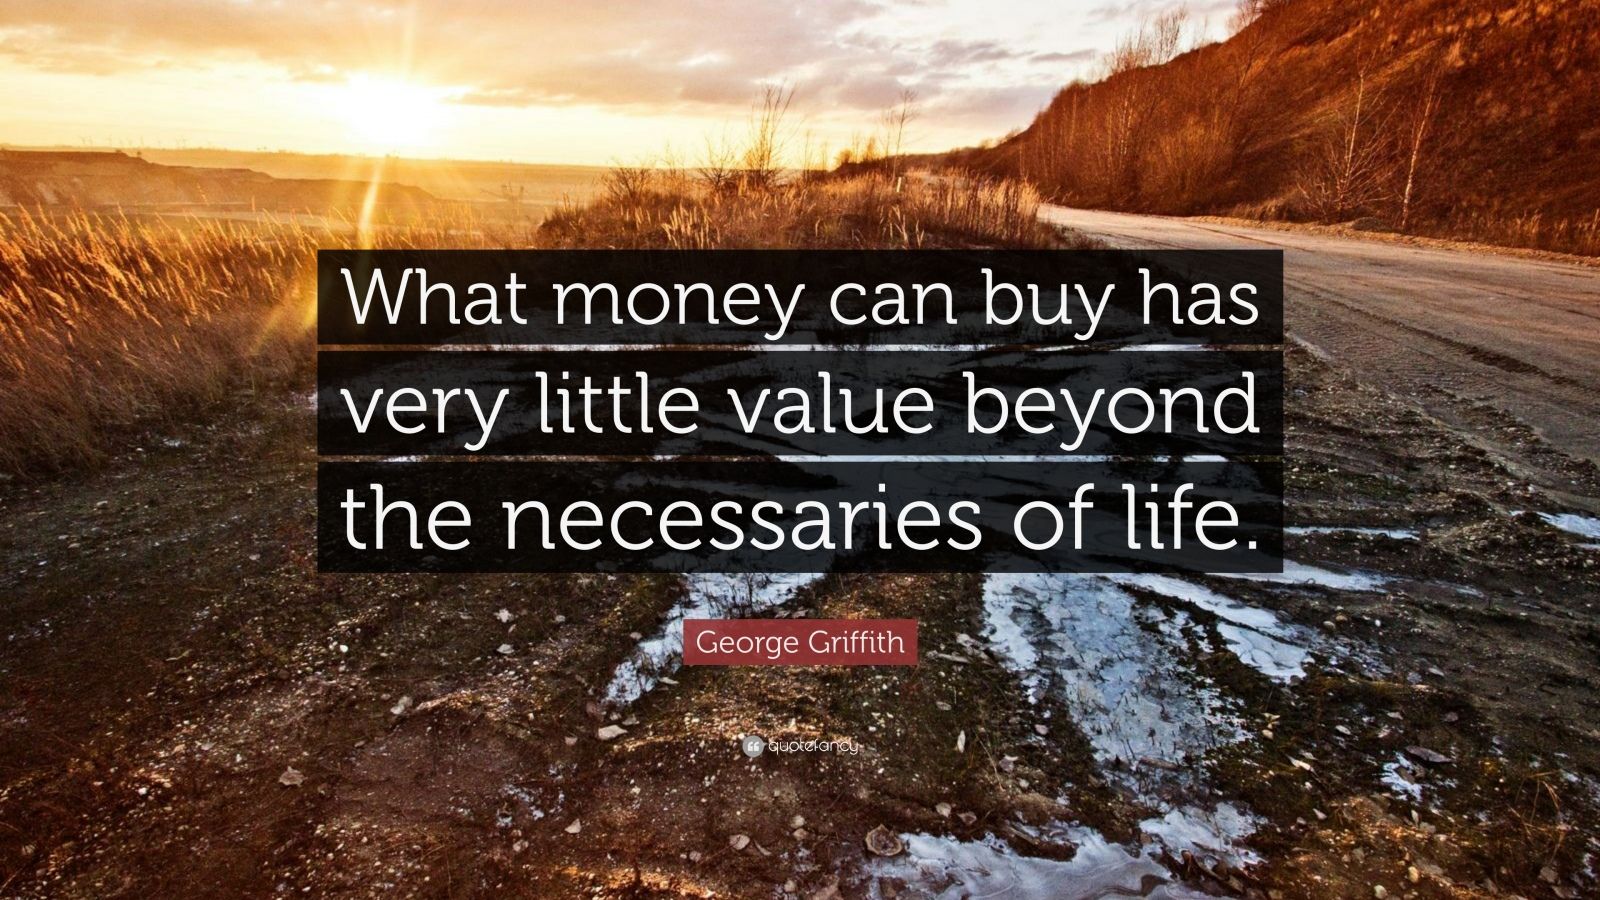 George Griffith Quote: “What money can buy has very little value beyond ...